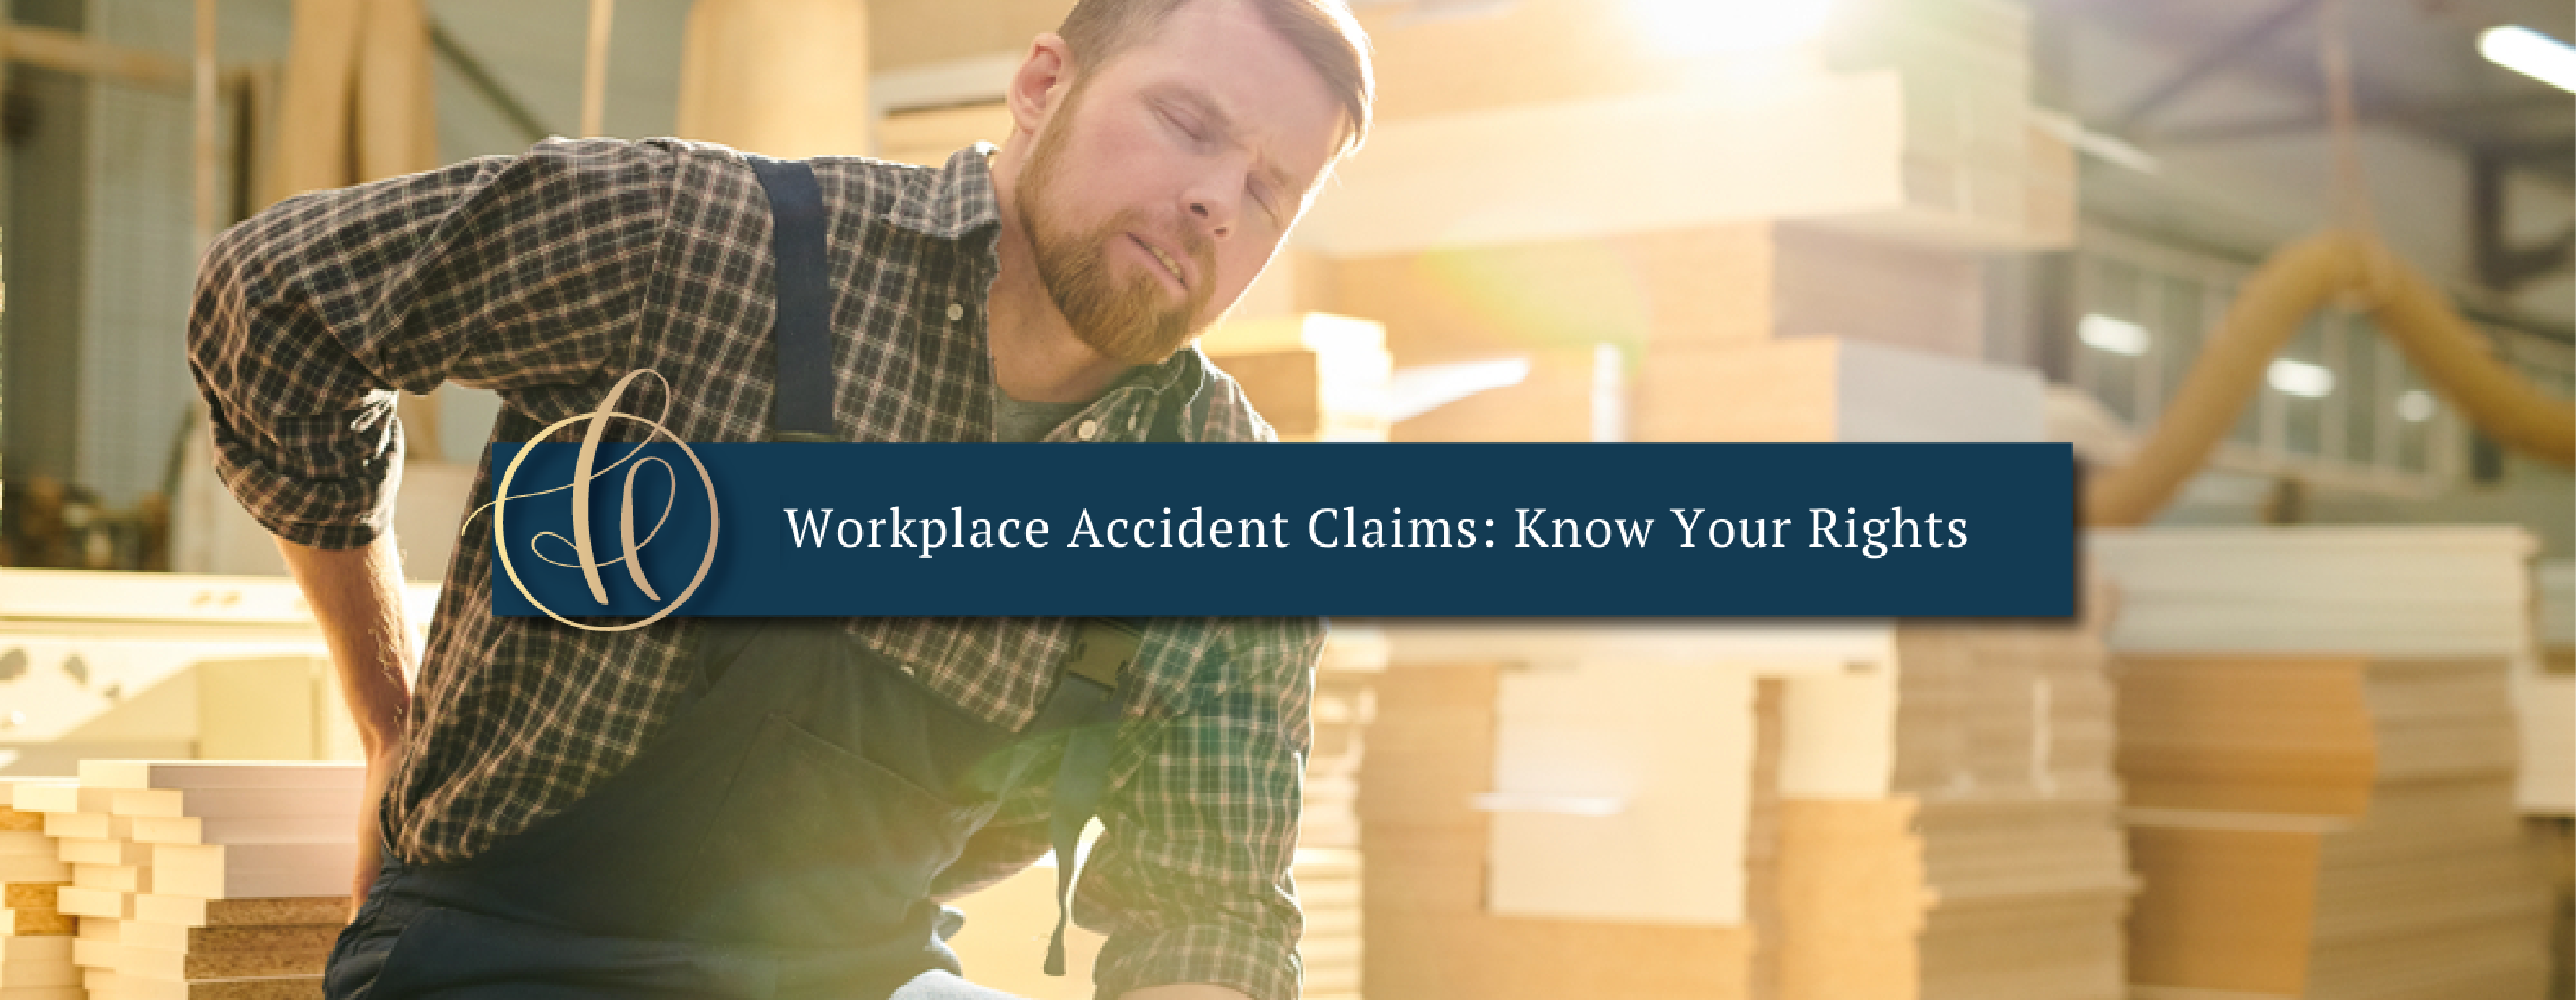 Workplace Accident Claims: Know Your Rights